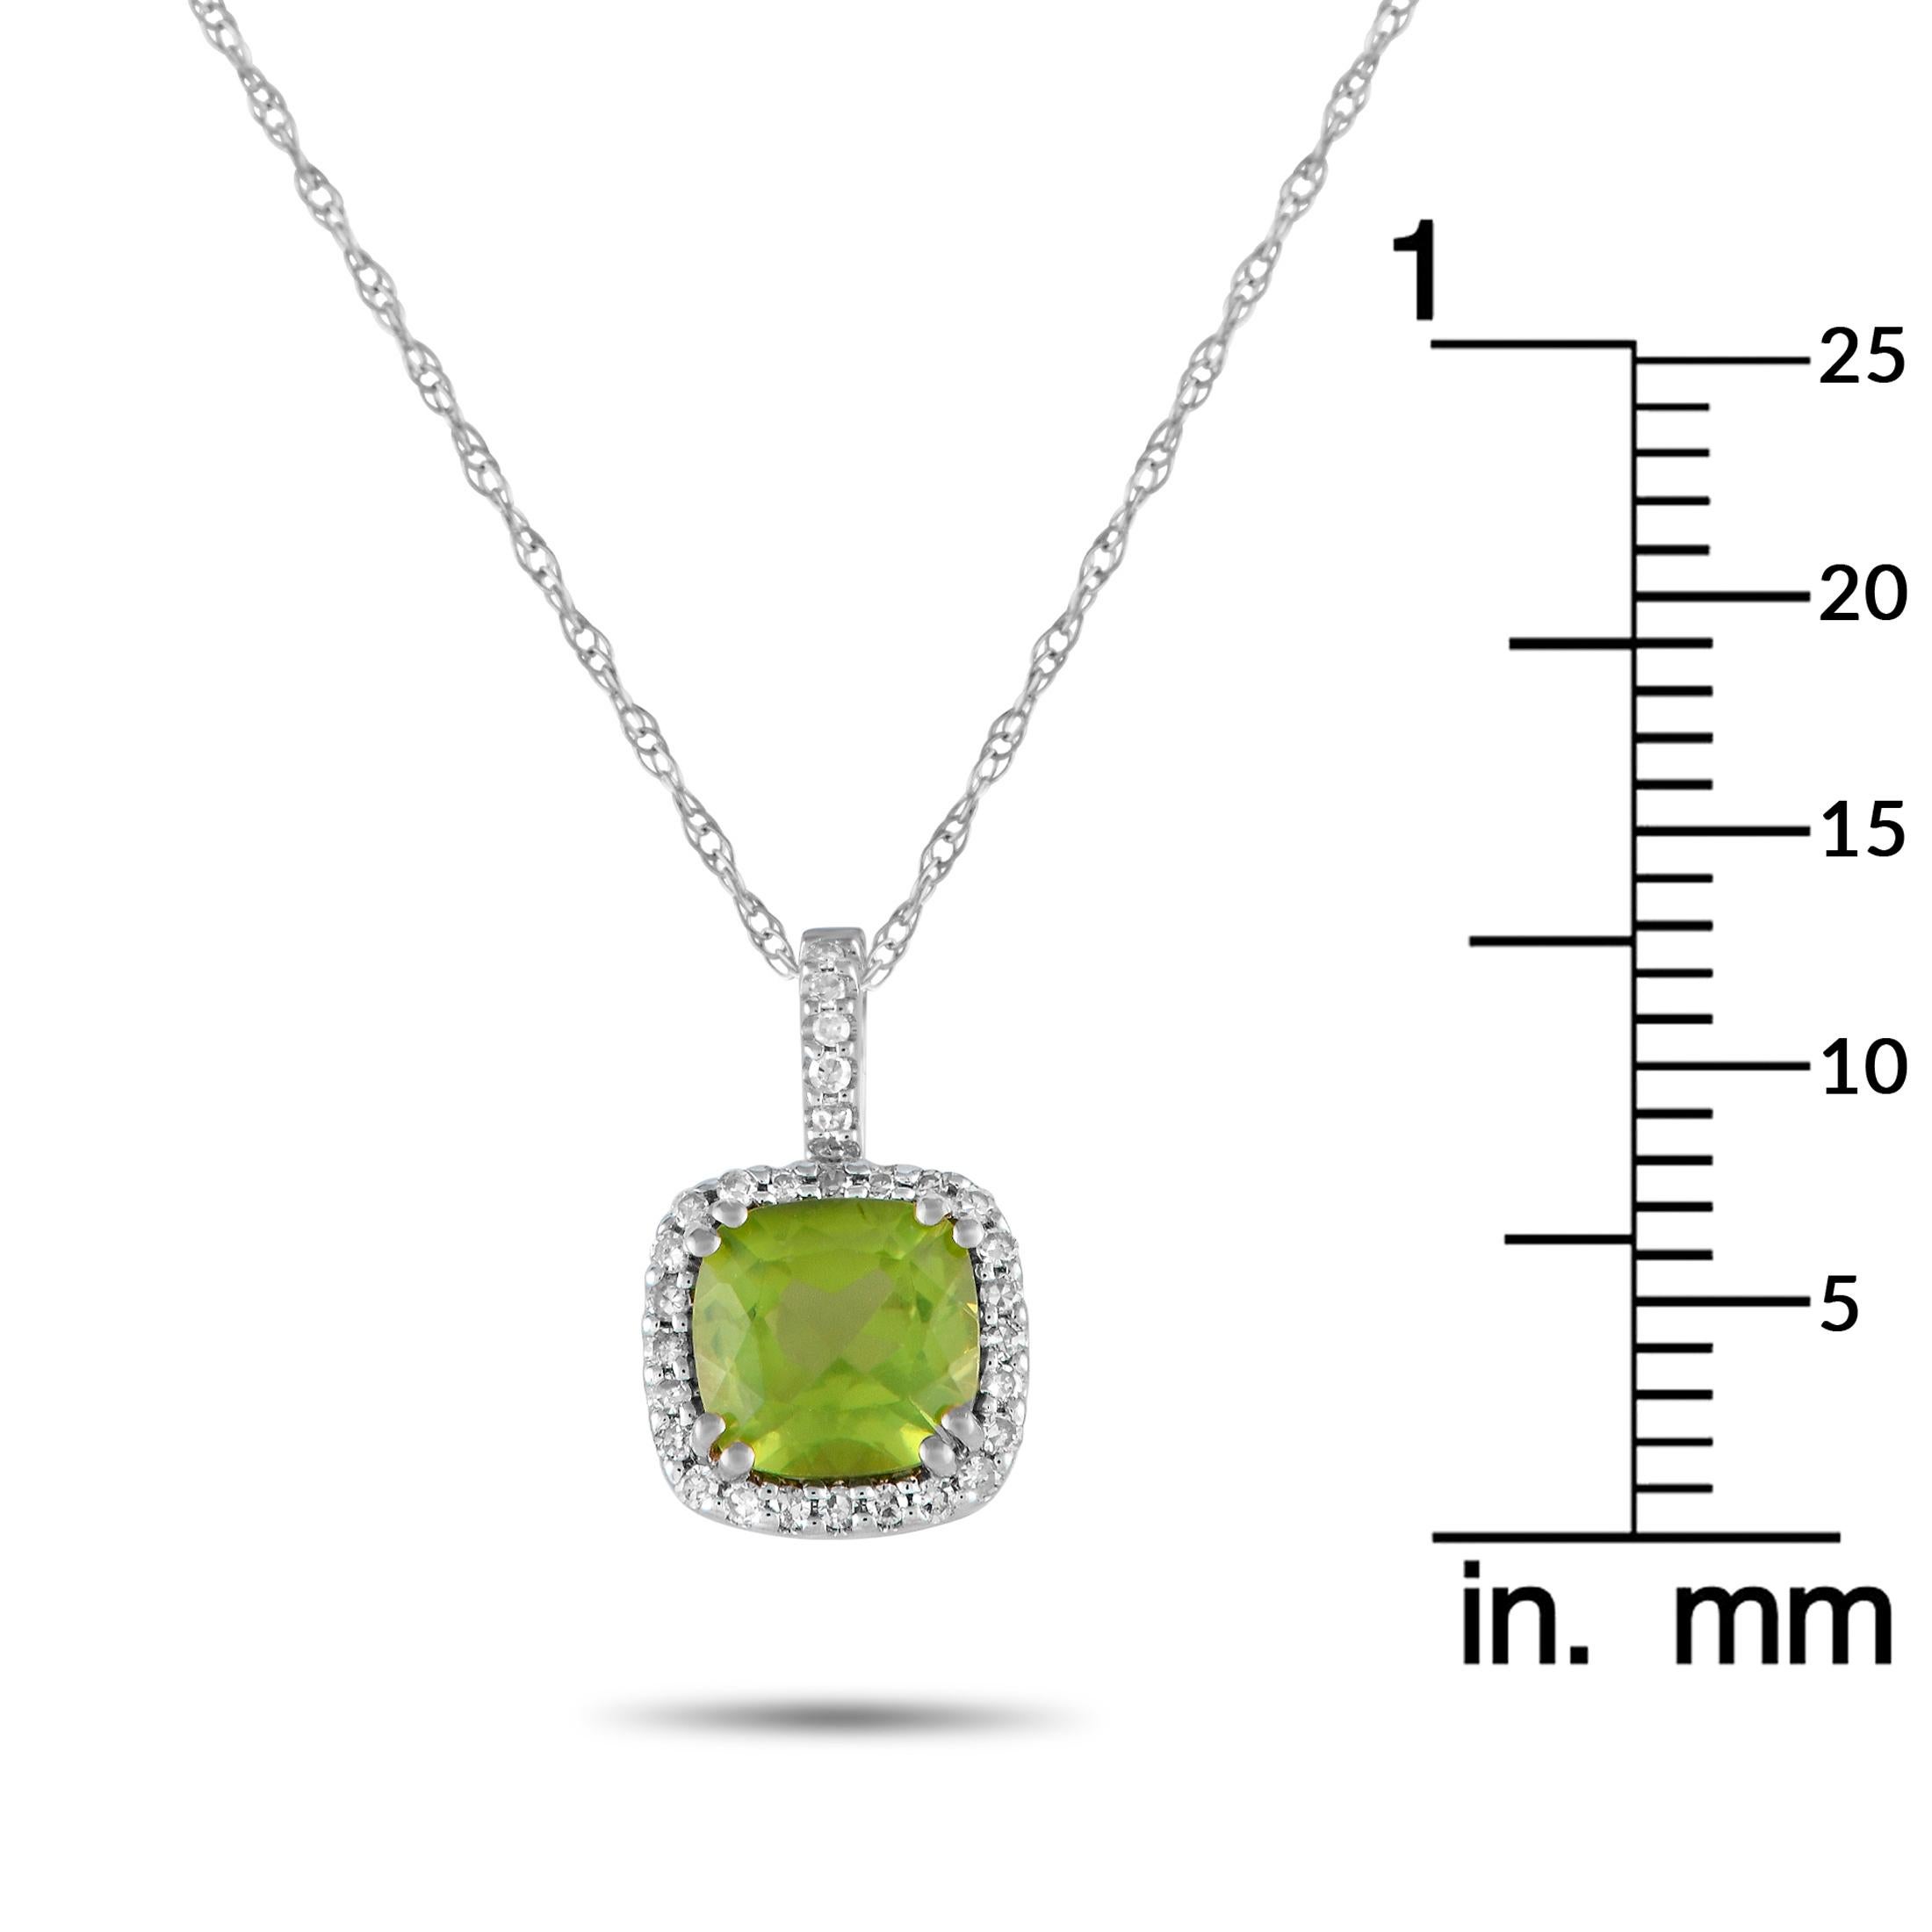 LB Exclusive 14K White Gold 0.09ct Diamond Pendant Necklace PD4-16269YPE In New Condition For Sale In Southampton, PA